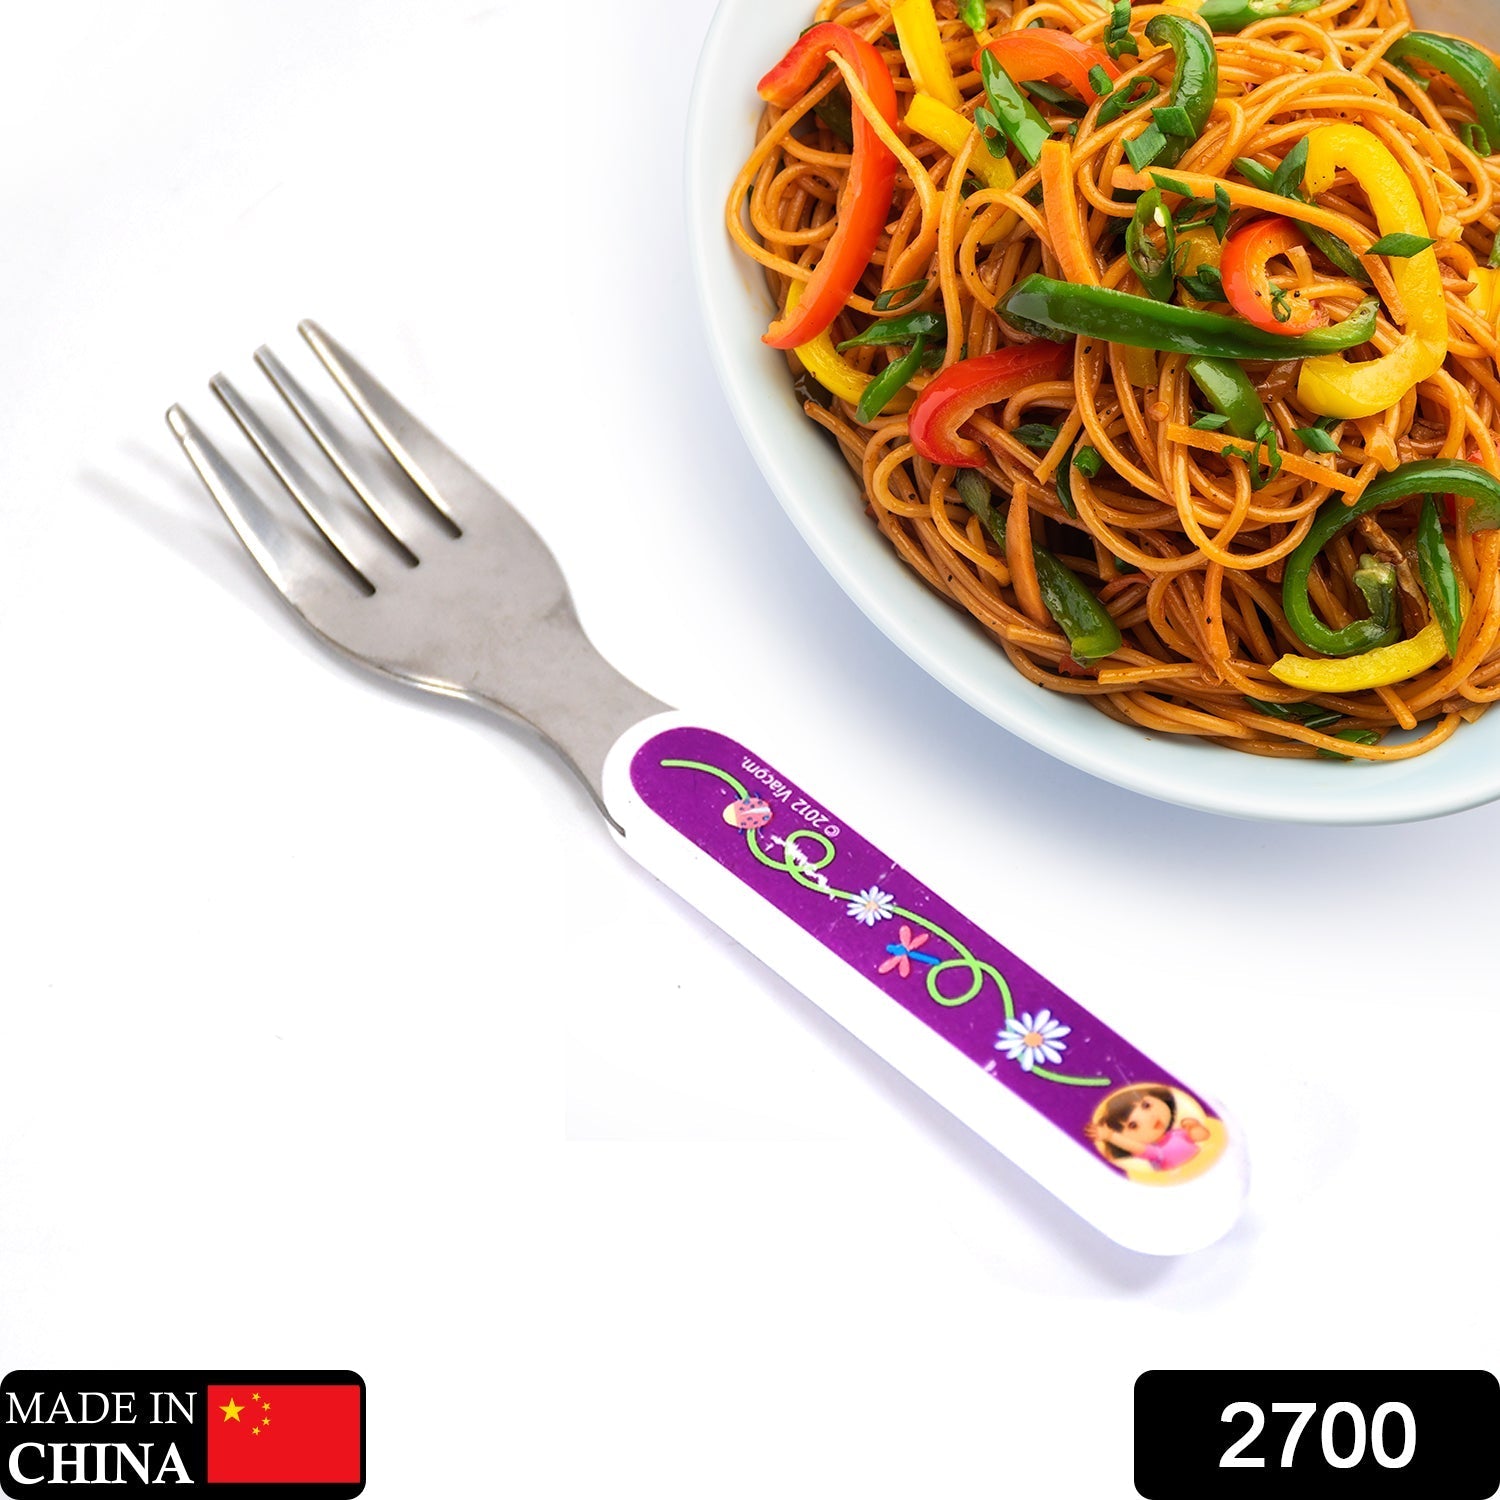 2700 STAINLESS STEEL FORKS WITH COMFORTABLE GRIP DINING FORK DeoDap